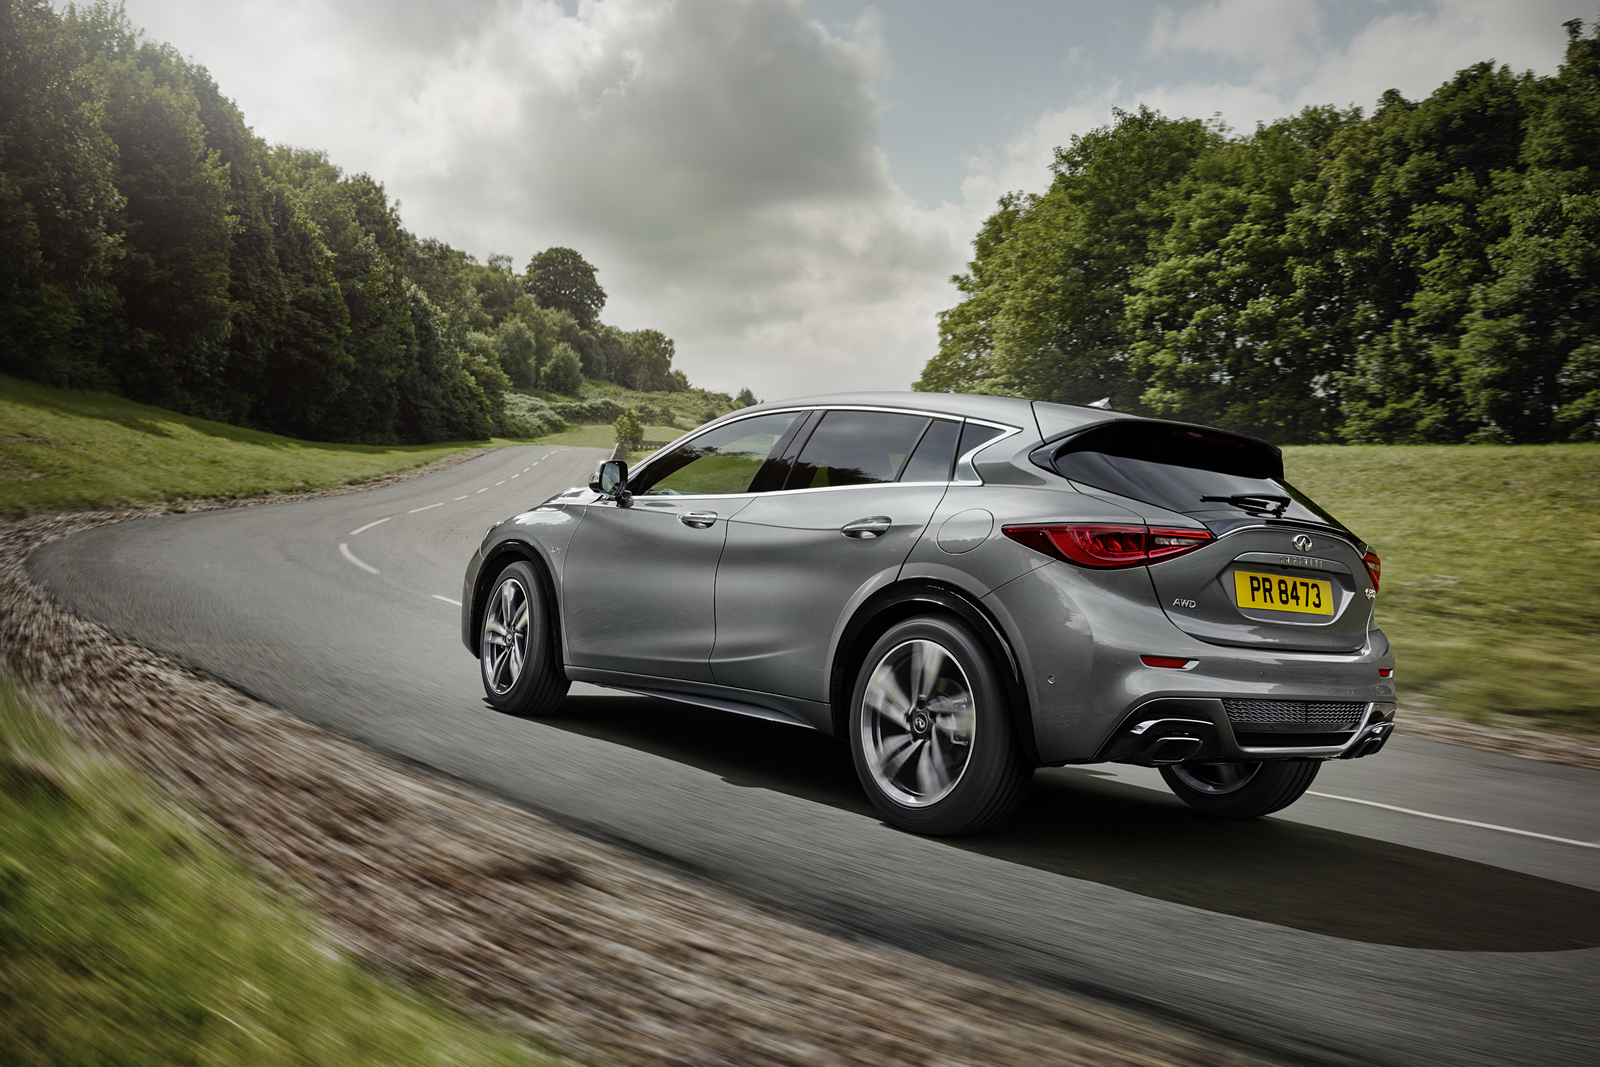 Designed for a new generation of buyers who are not willing to be defined by their choice of vehicle body type, the Infiniti Q30 challenges convention with its bold character and daring shape. The car stays true to the signature design cues from the original 2013 concept and exemplifies Infiniti's design-led, customer-centric approach to product development. The unconventional stance and asymmetric interior contribute to an overall design that is certain to command attention.